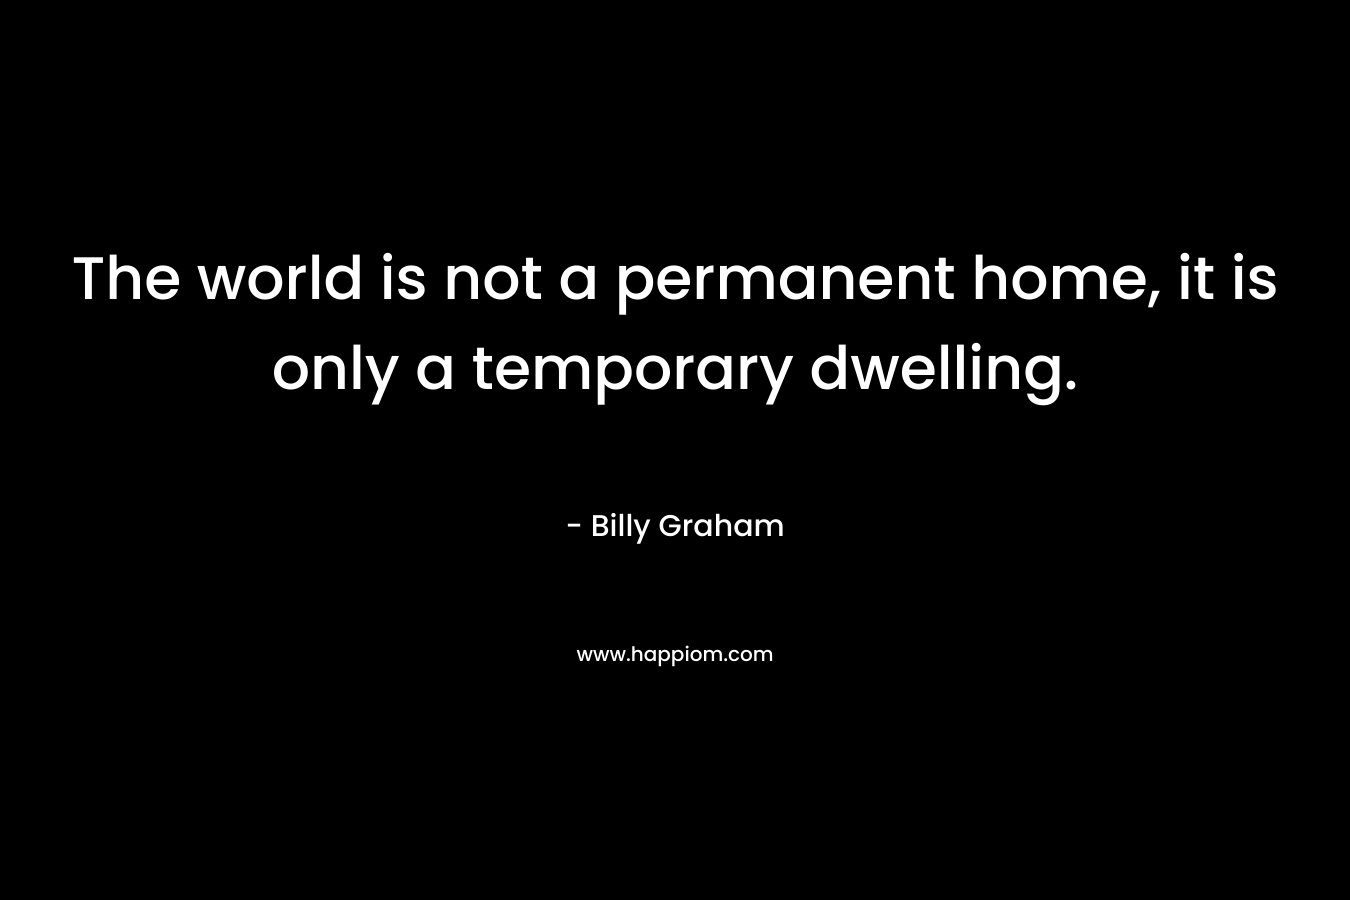 The world is not a permanent home, it is only a temporary dwelling. – Billy Graham